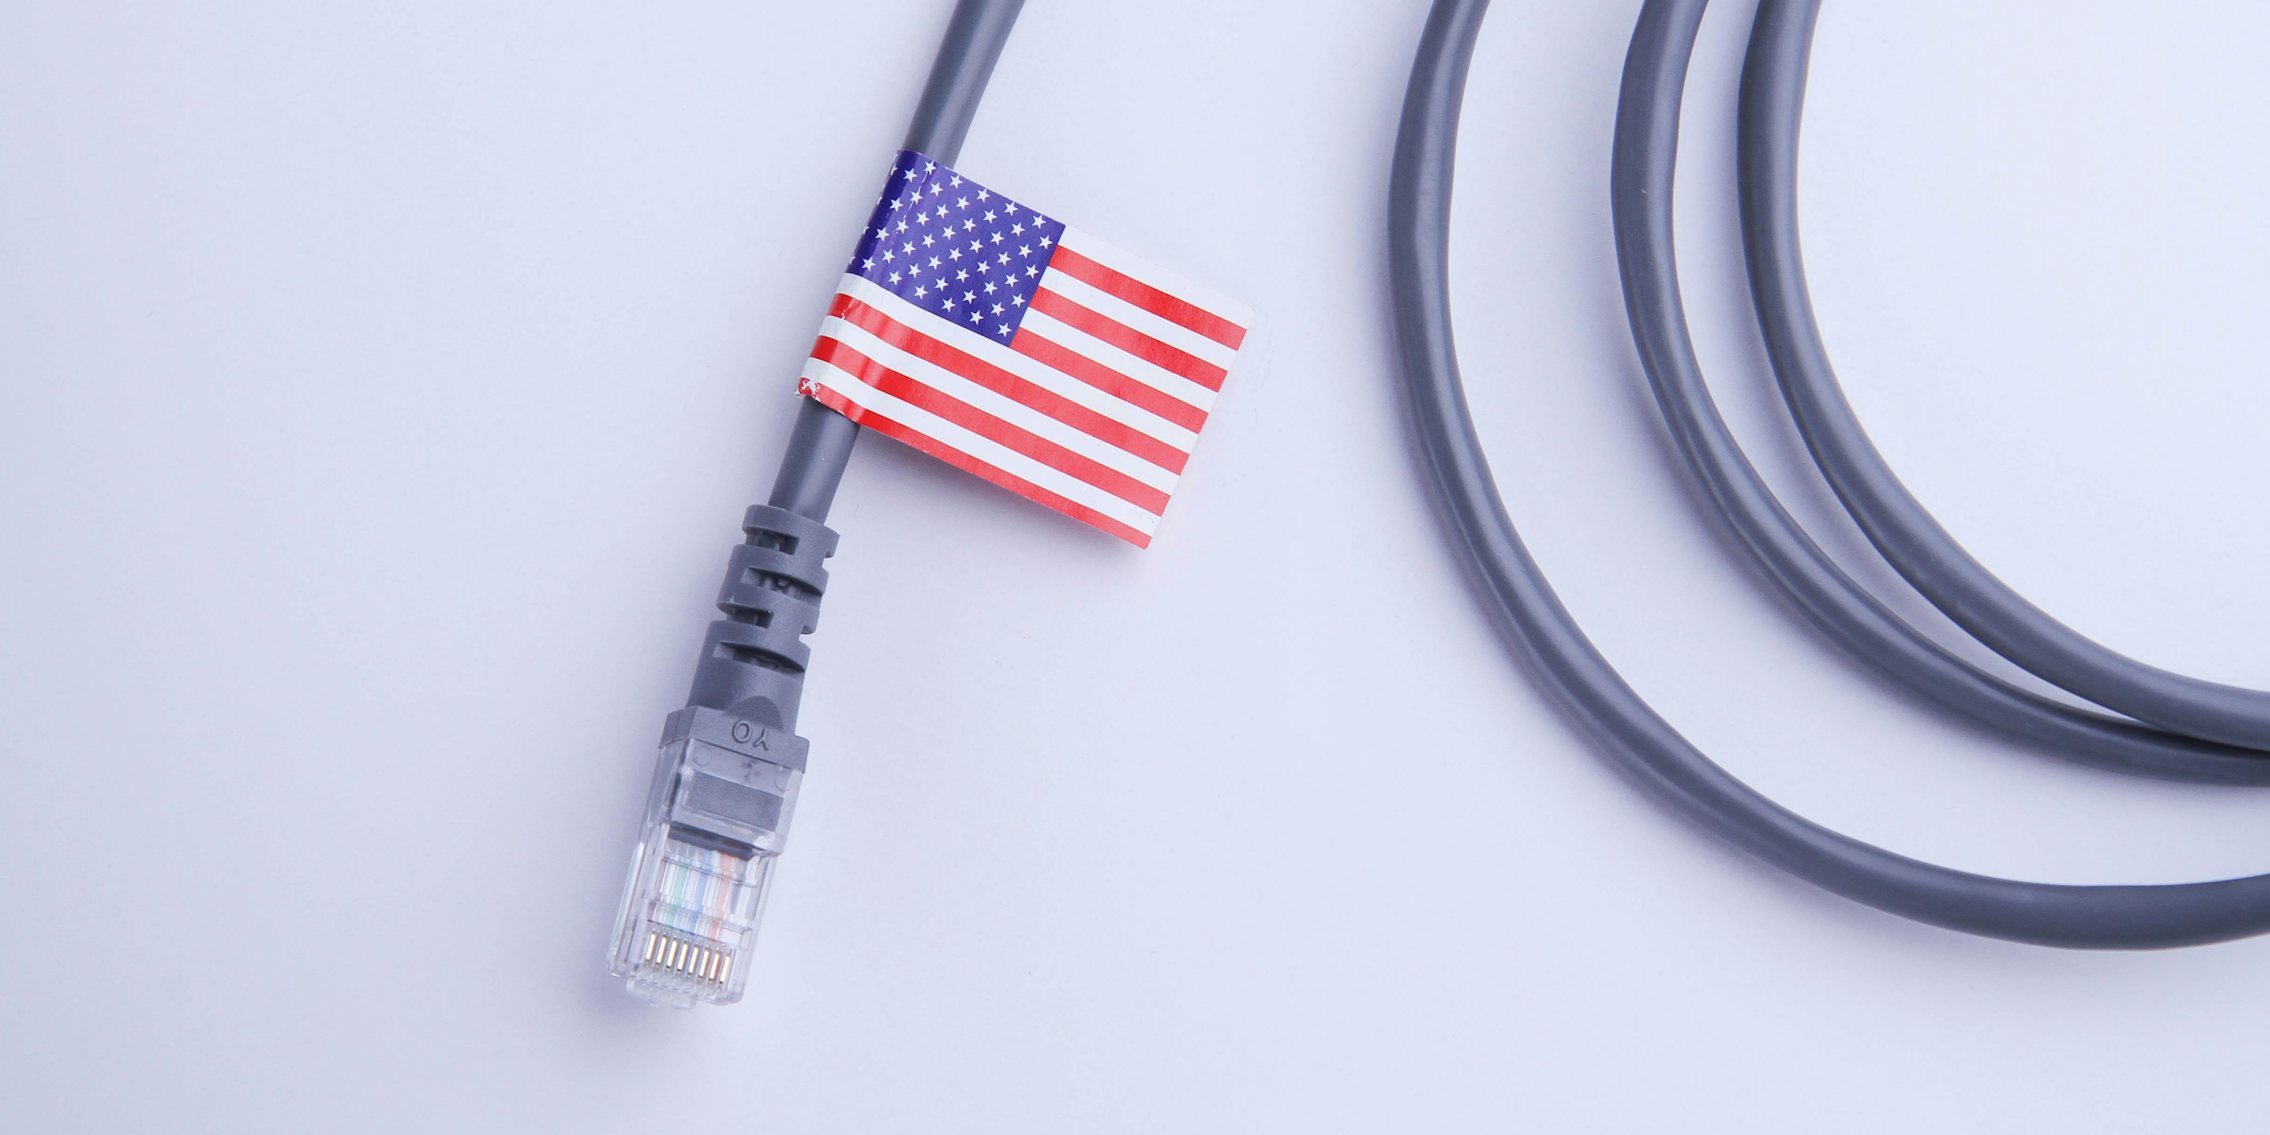 An ethernet cord with the American flag on it.